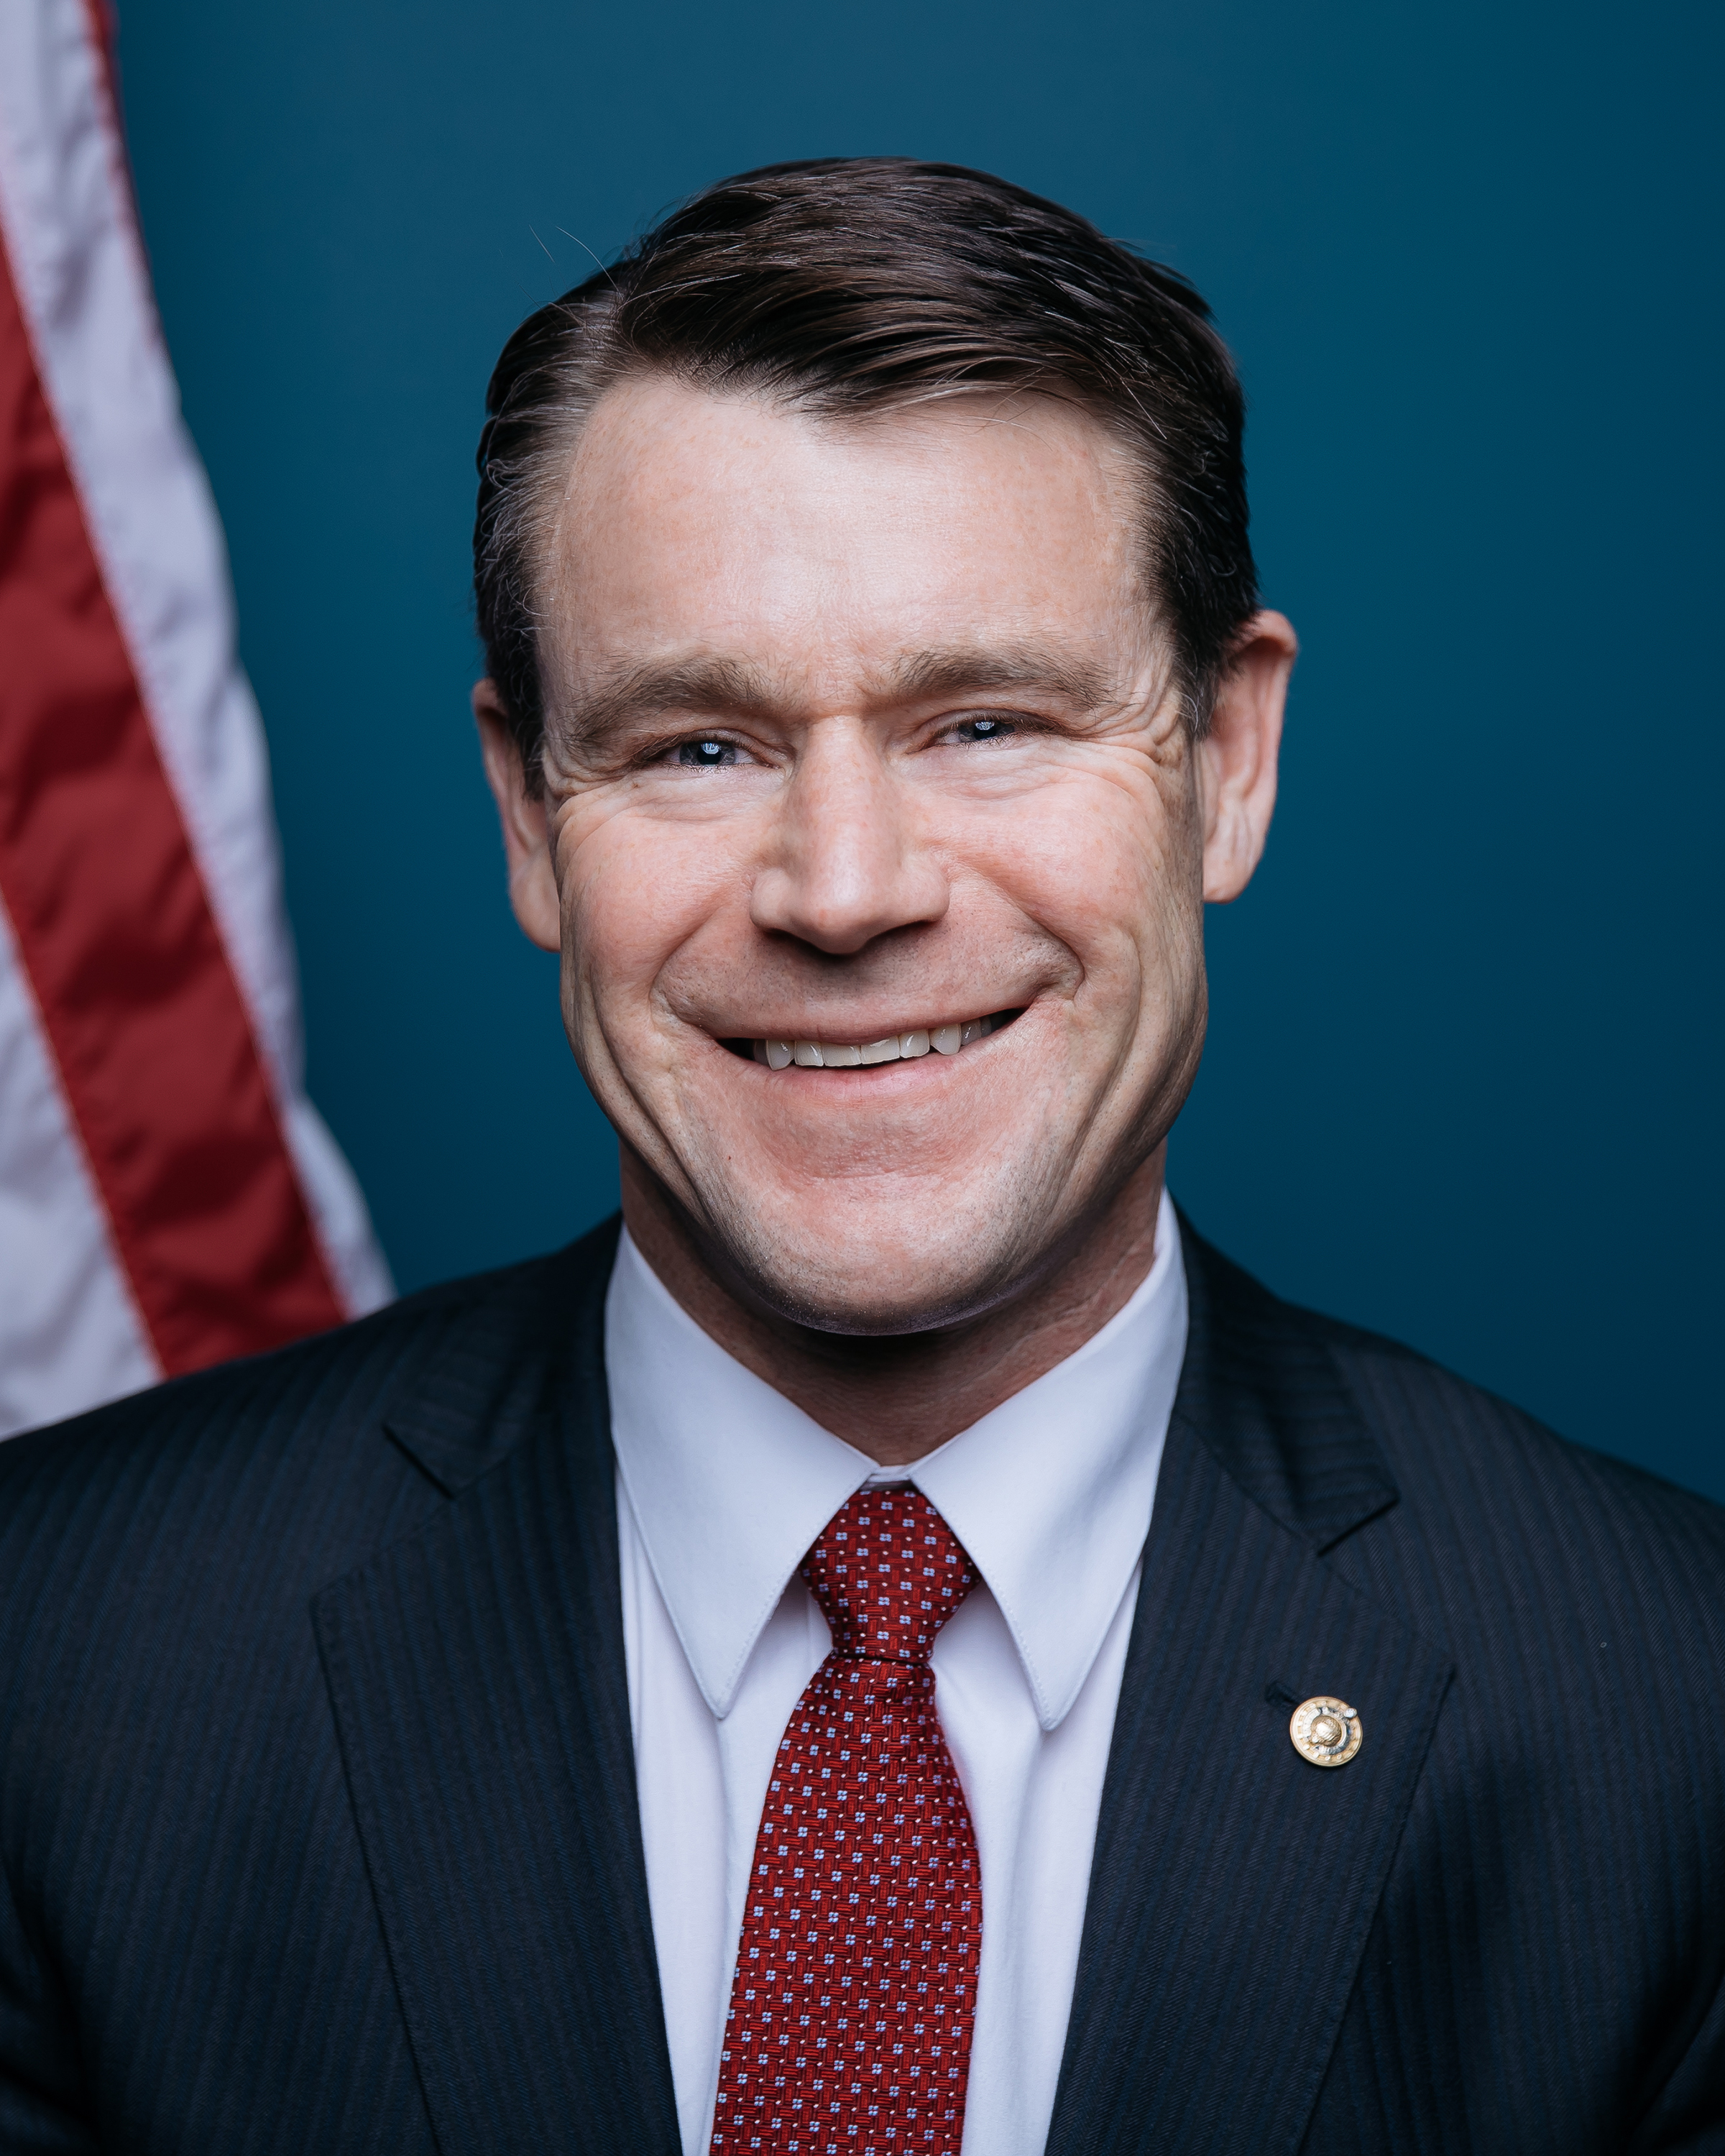 todd-young-wikipedia